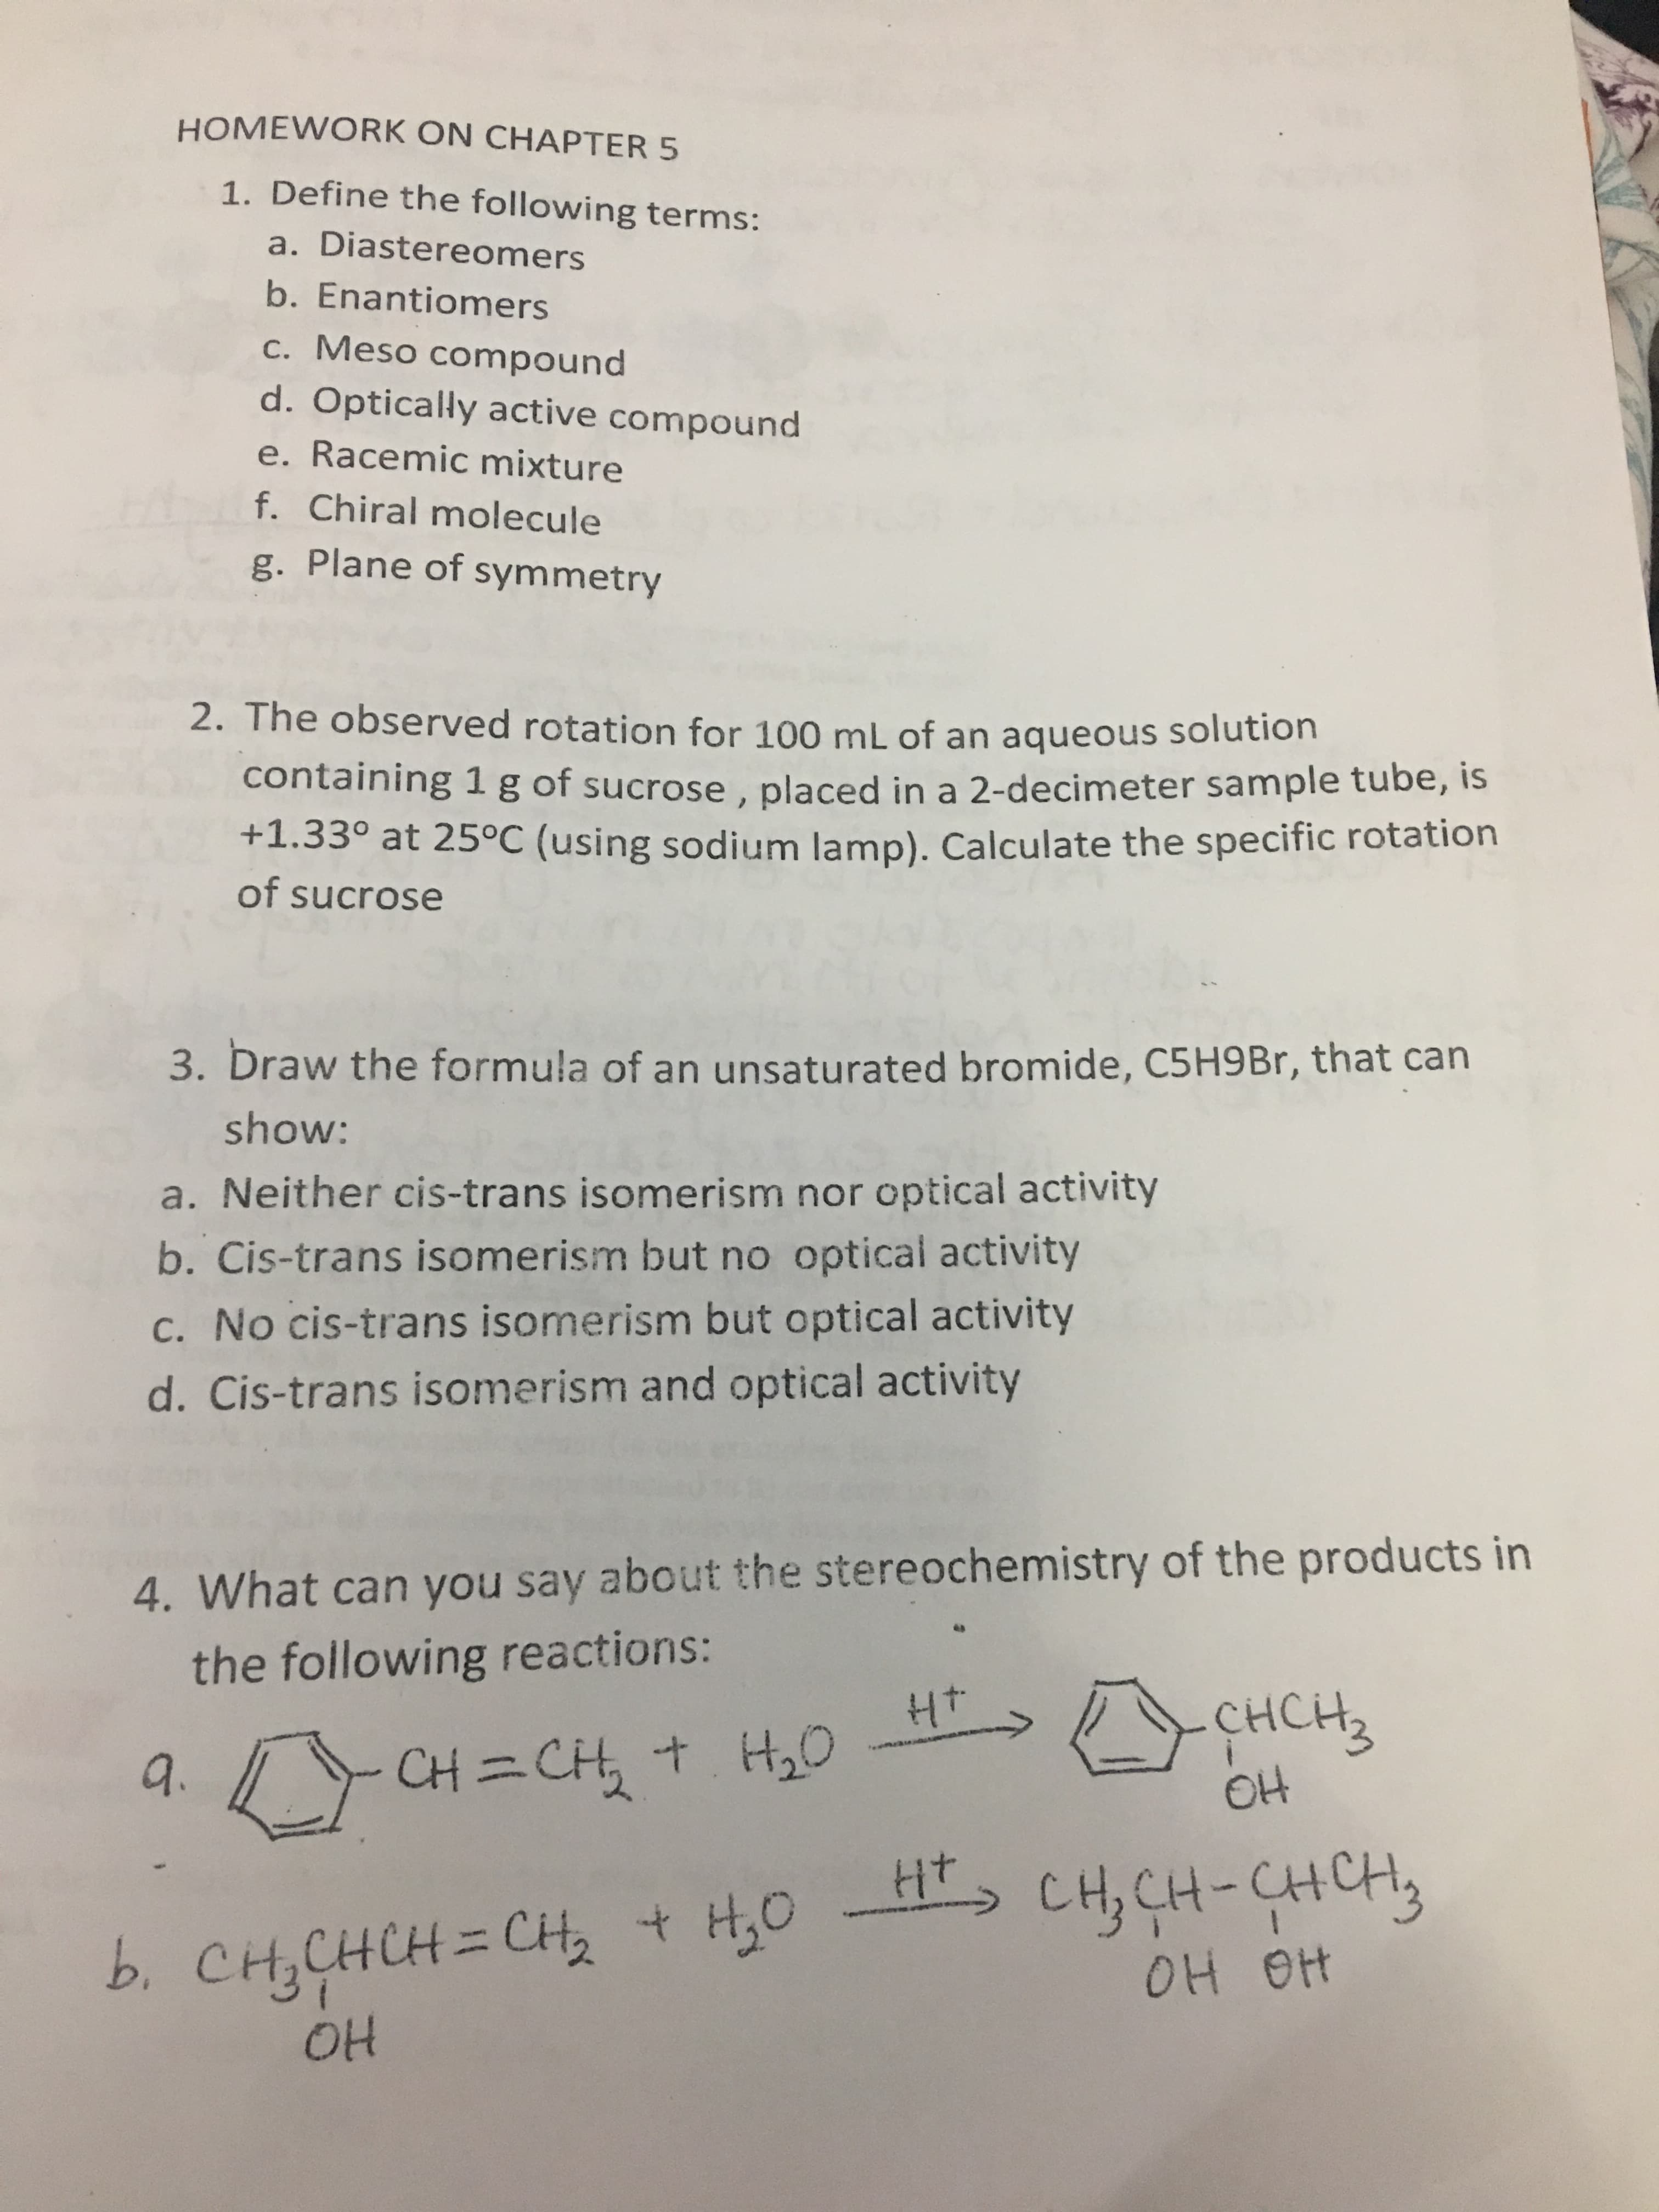 HOMEWORK ON CHAPTER 5
1. Define the following terms:
a. Diastereomers
b. Enantiomers
c. Meso compound
d. Optically active compound
e. Racemic mixture
f. Chiral molecule
g. Plane of symmetry
2. The observed rotation for 100 mL of an aqueous solution
containing 1g of sucrose, placed in a 2-decimeter sample tube, is
+1.33° at 25°C (using sodium lamp). Calculate the specific rotation
of sucrose
3. Draw the formula of an unsaturated bromide, C5H9Br, that can
show:
a. Neither cis-trans isomerism nor optical activity
b. Cis-trans isomerism but no optical activity
c. No cis-trans isomerism but optical activity
d. Cis-trans isomerism and optical activity
4. What can you say about the stereochemistry of the products in
the following reactions:
Ht
H20
CHCH
CH=CHt
H
CH, CH-CHCH
b. снснсн - СH
OH
H;o
+
OH Ott
